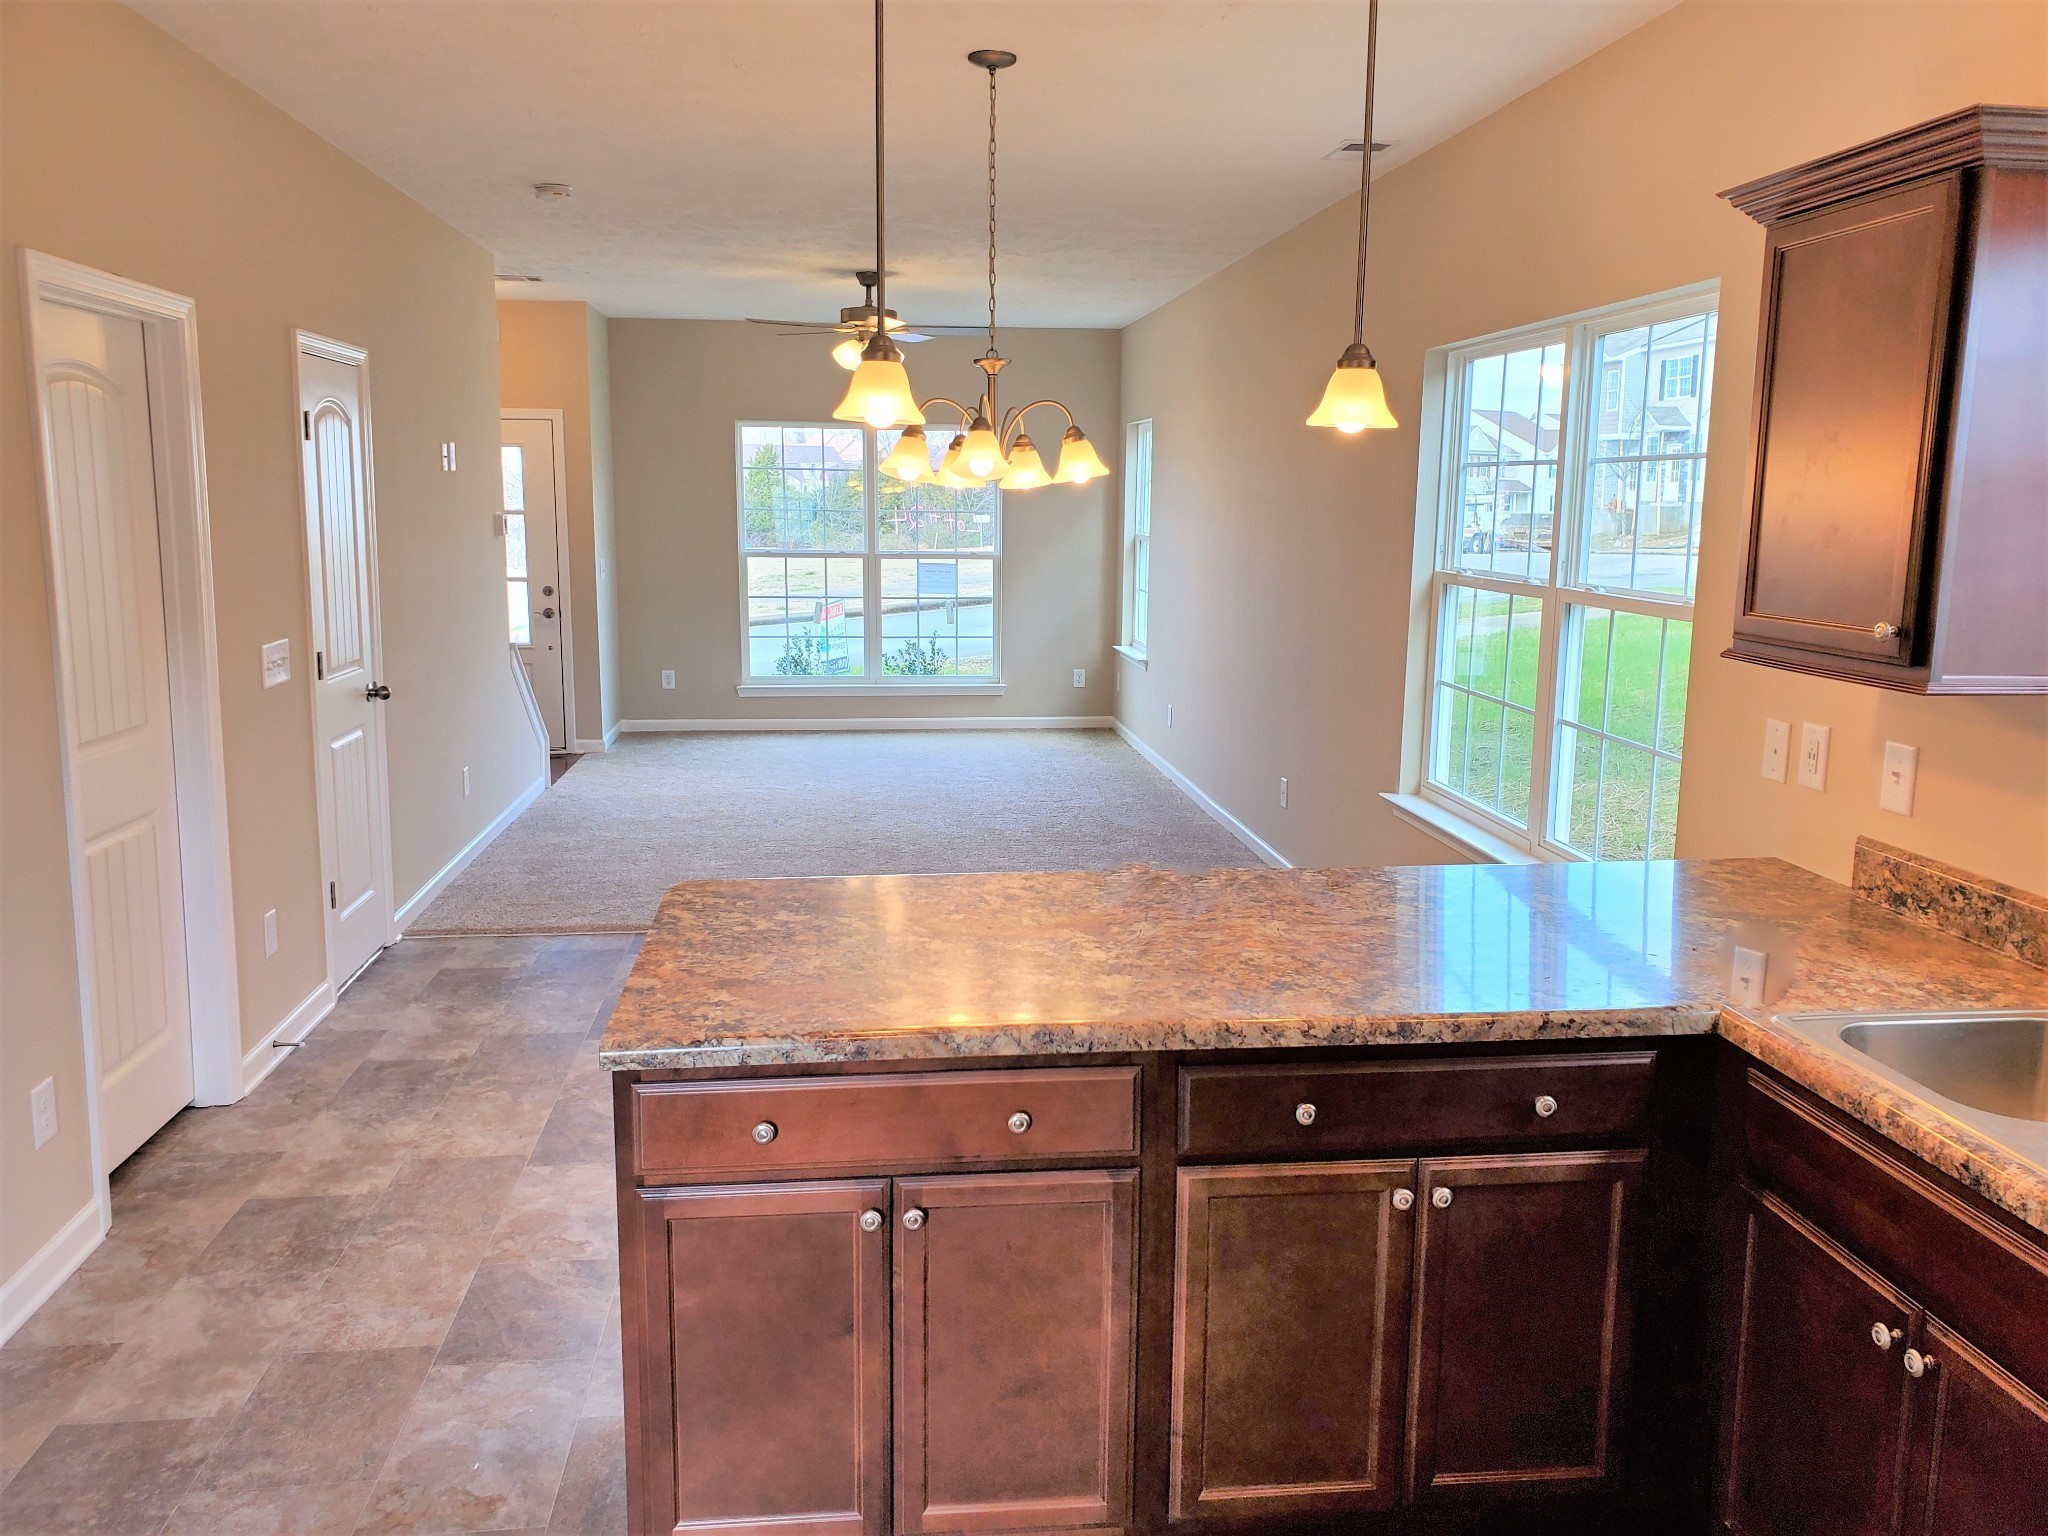 a room with kitchen island granite countertop wooden cabinets a counter top space and stainless steel appliances